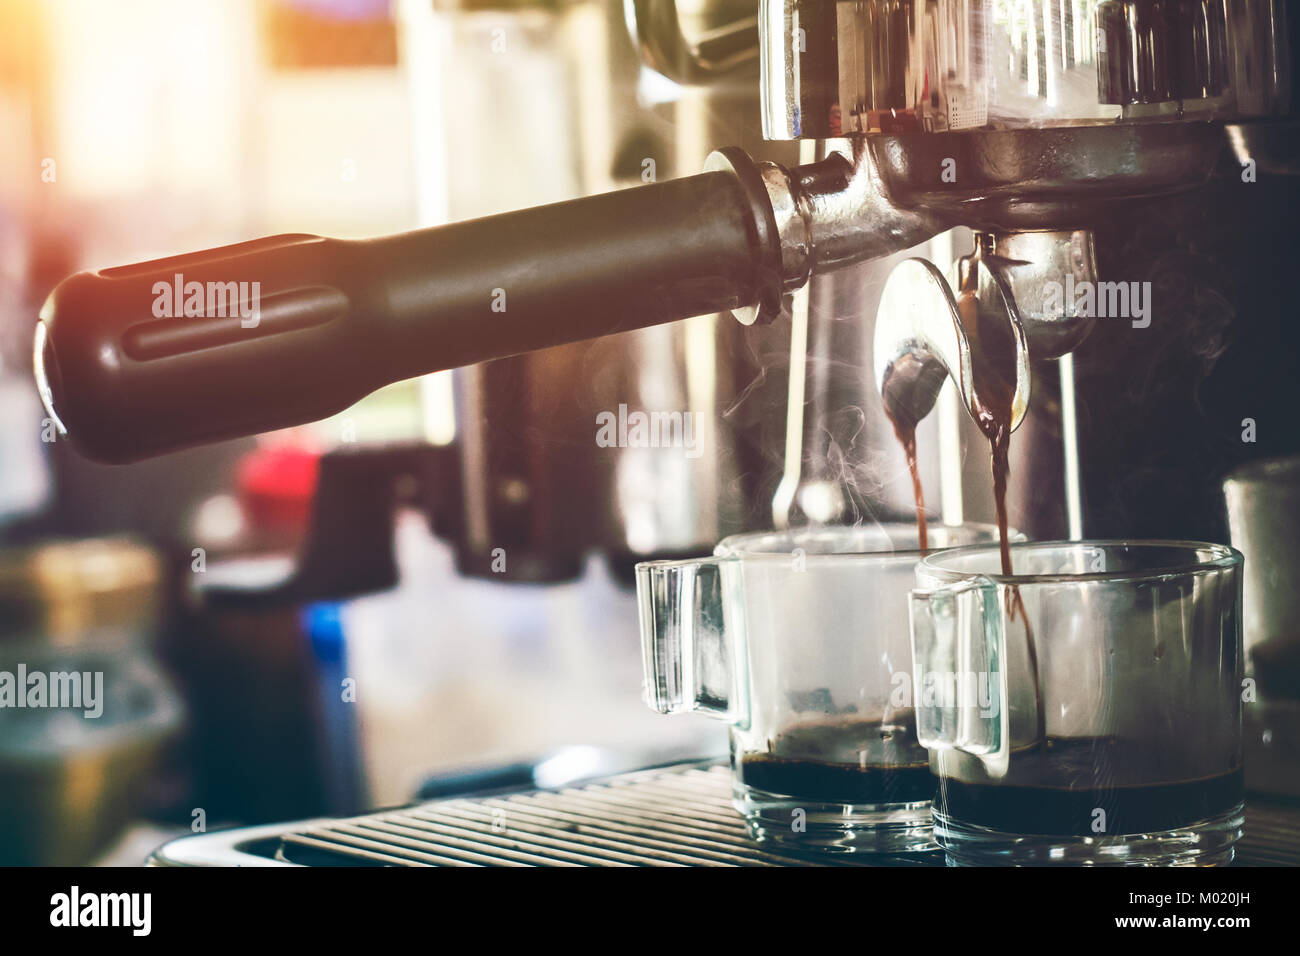 Close-up Of Espresso Machine Pouring Coffee In A Glass Stock Photo